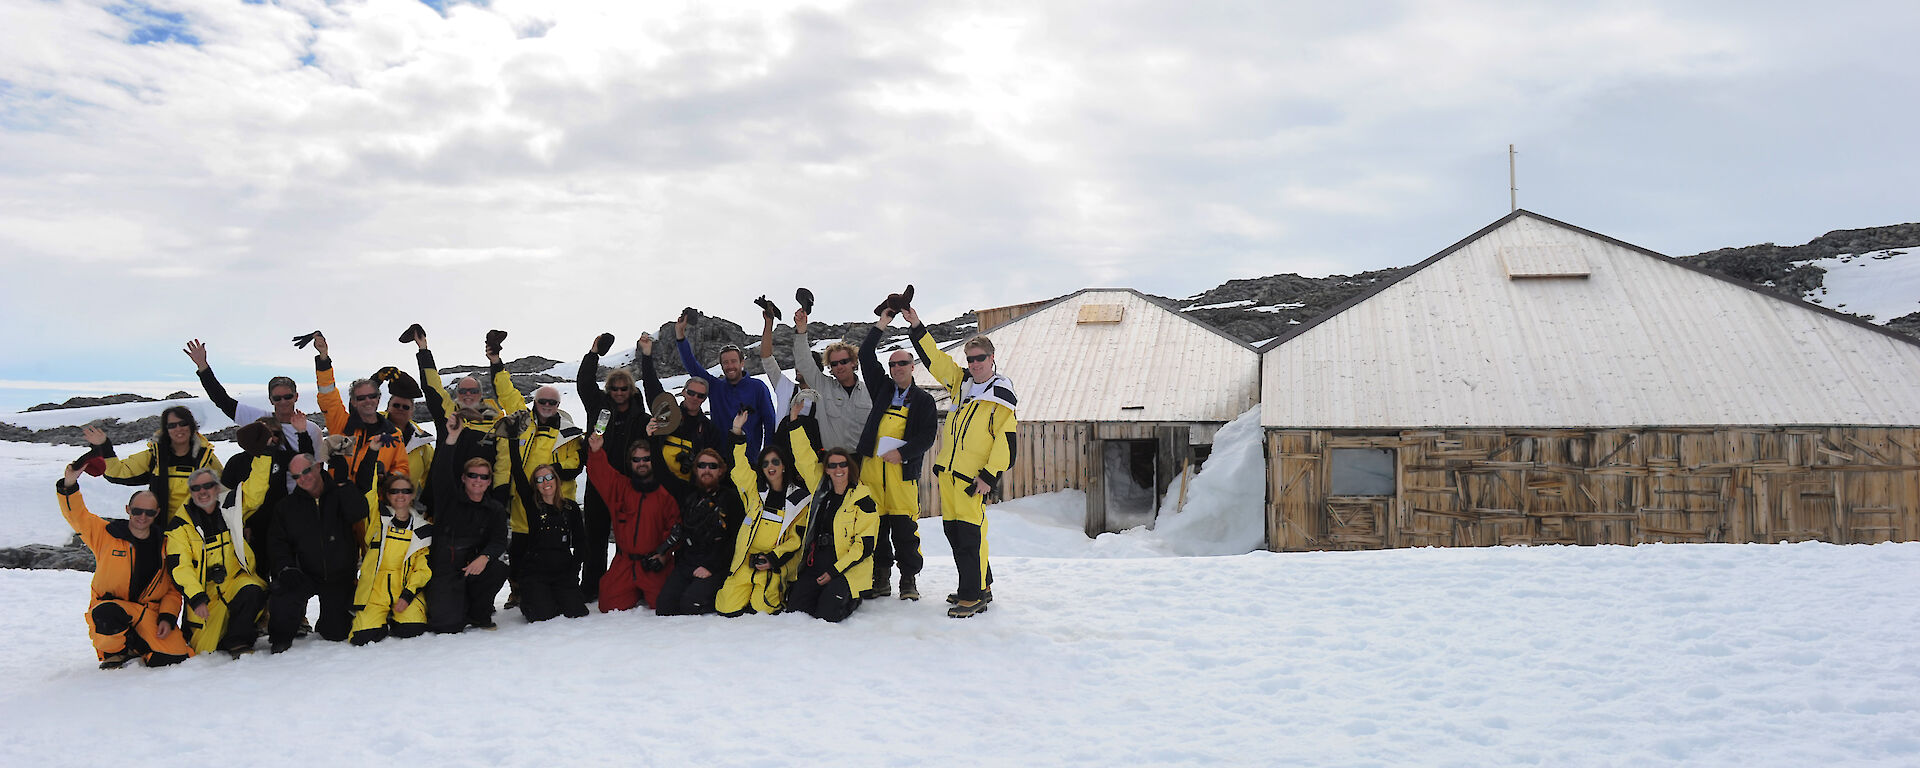 The Mawson’s Huts centenary team pose for a photograph in front of the huts.